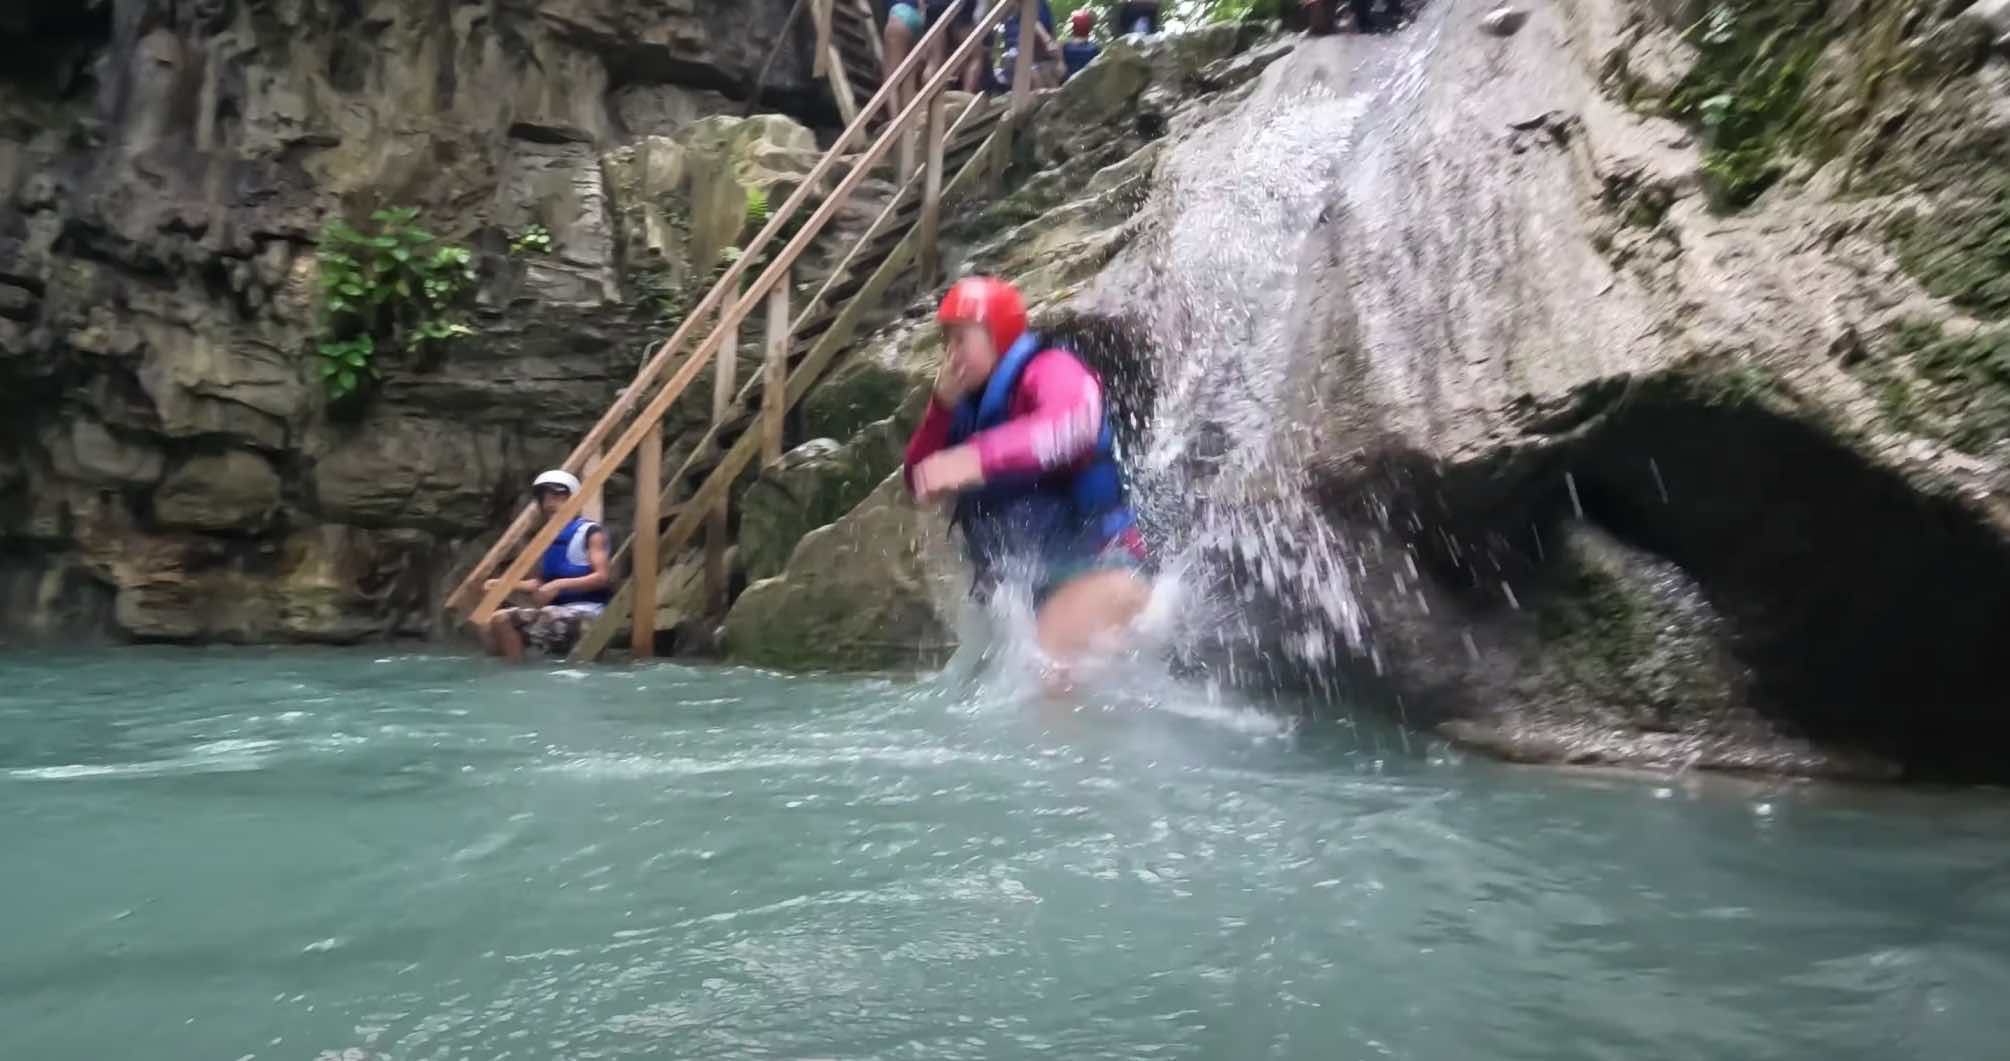 A tourist jumps into the water